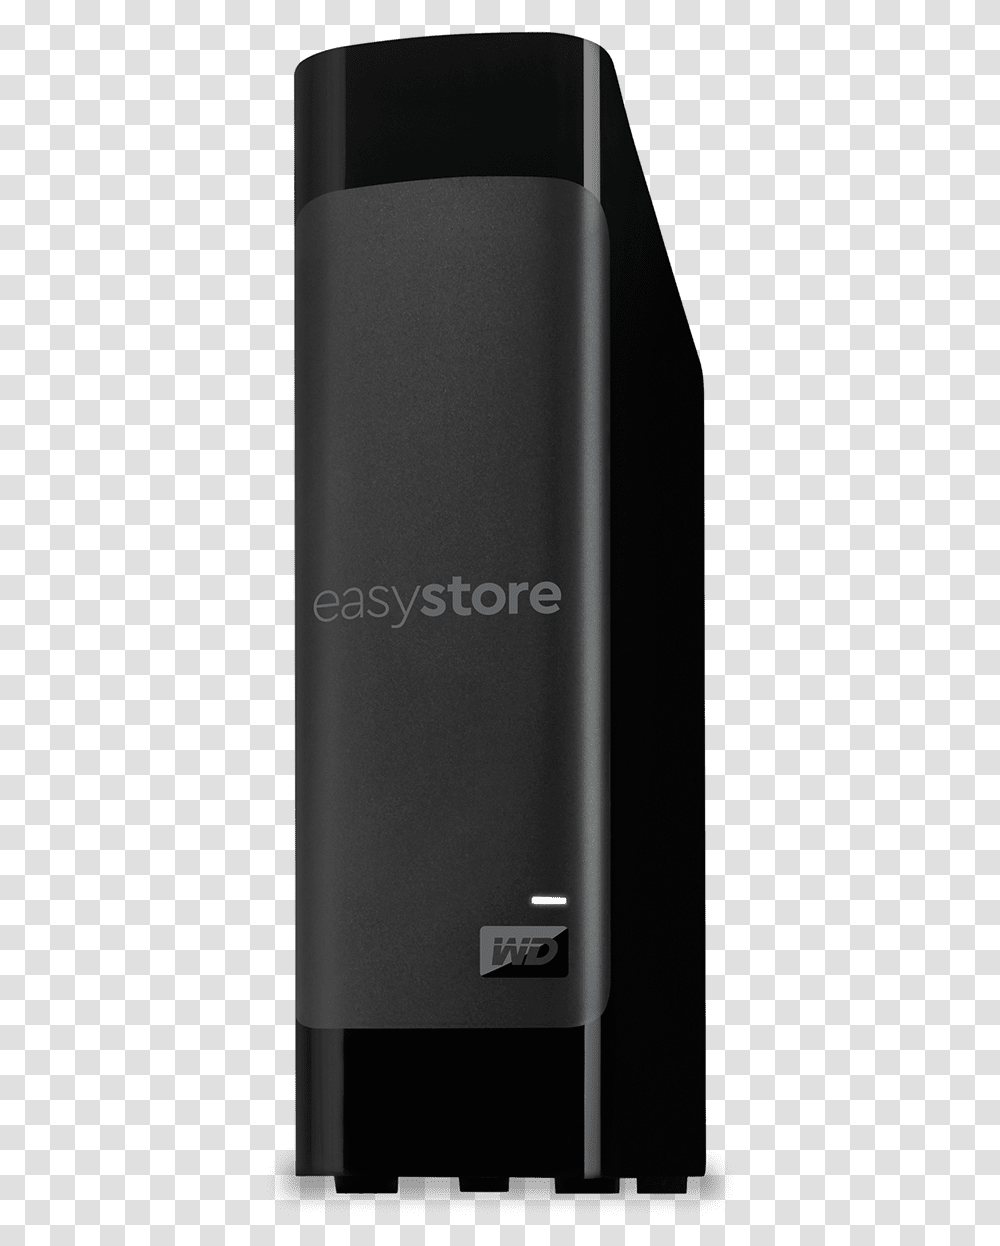 Easystore Desktop Storage Western Digital Store Portable, Mobile Phone, Electronics, Cell Phone, Ipod Transparent Png